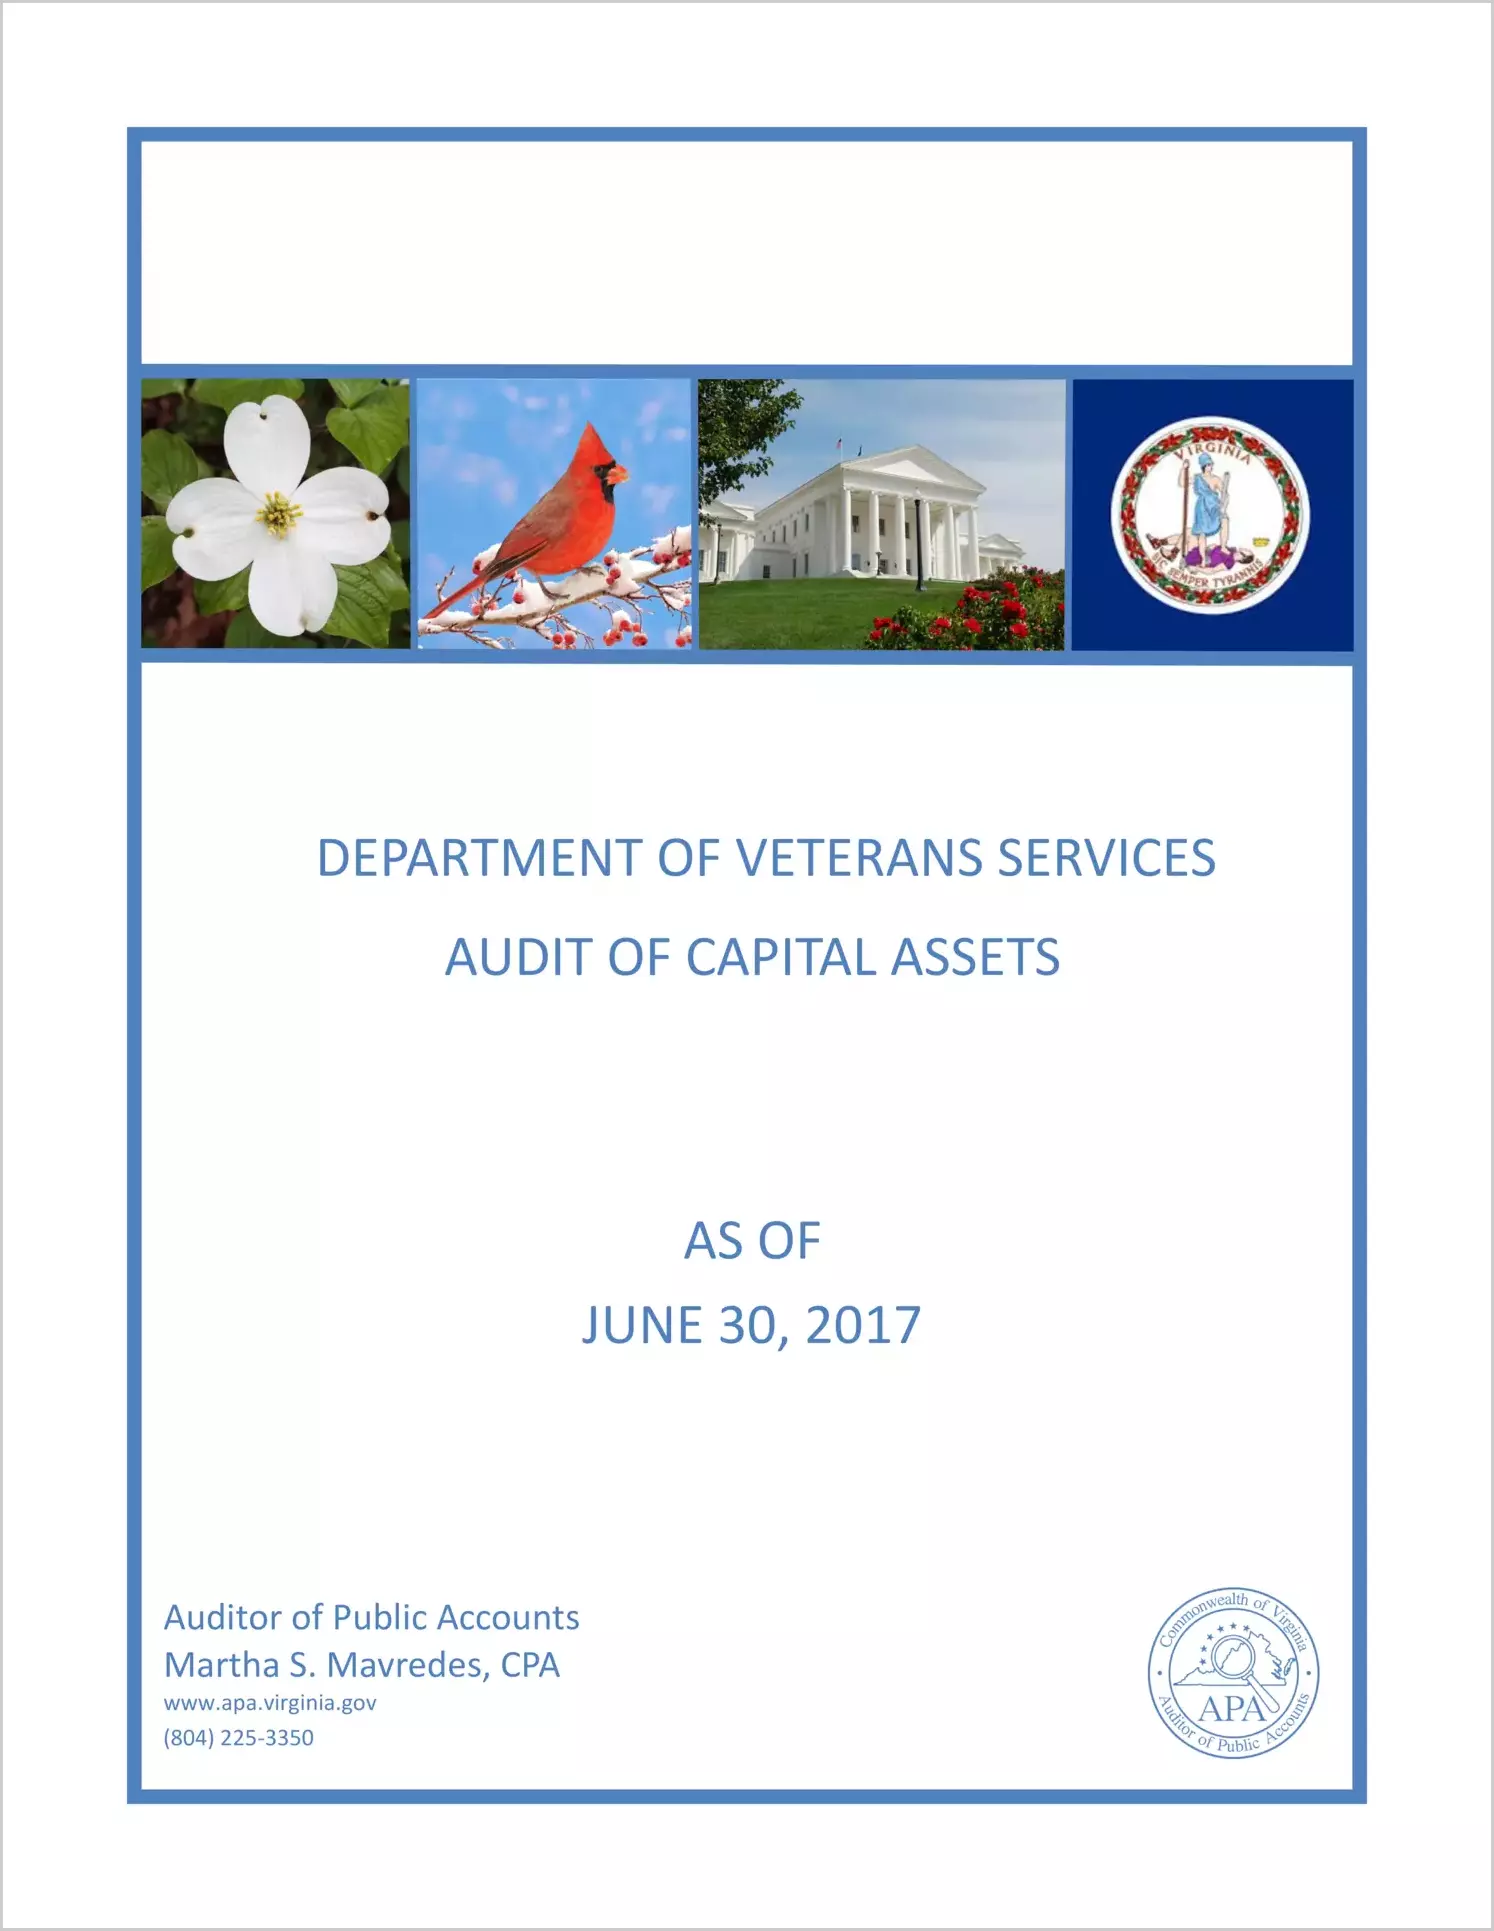 Department of Veterans Services Audit of Capital Assets as of June 30, 2017